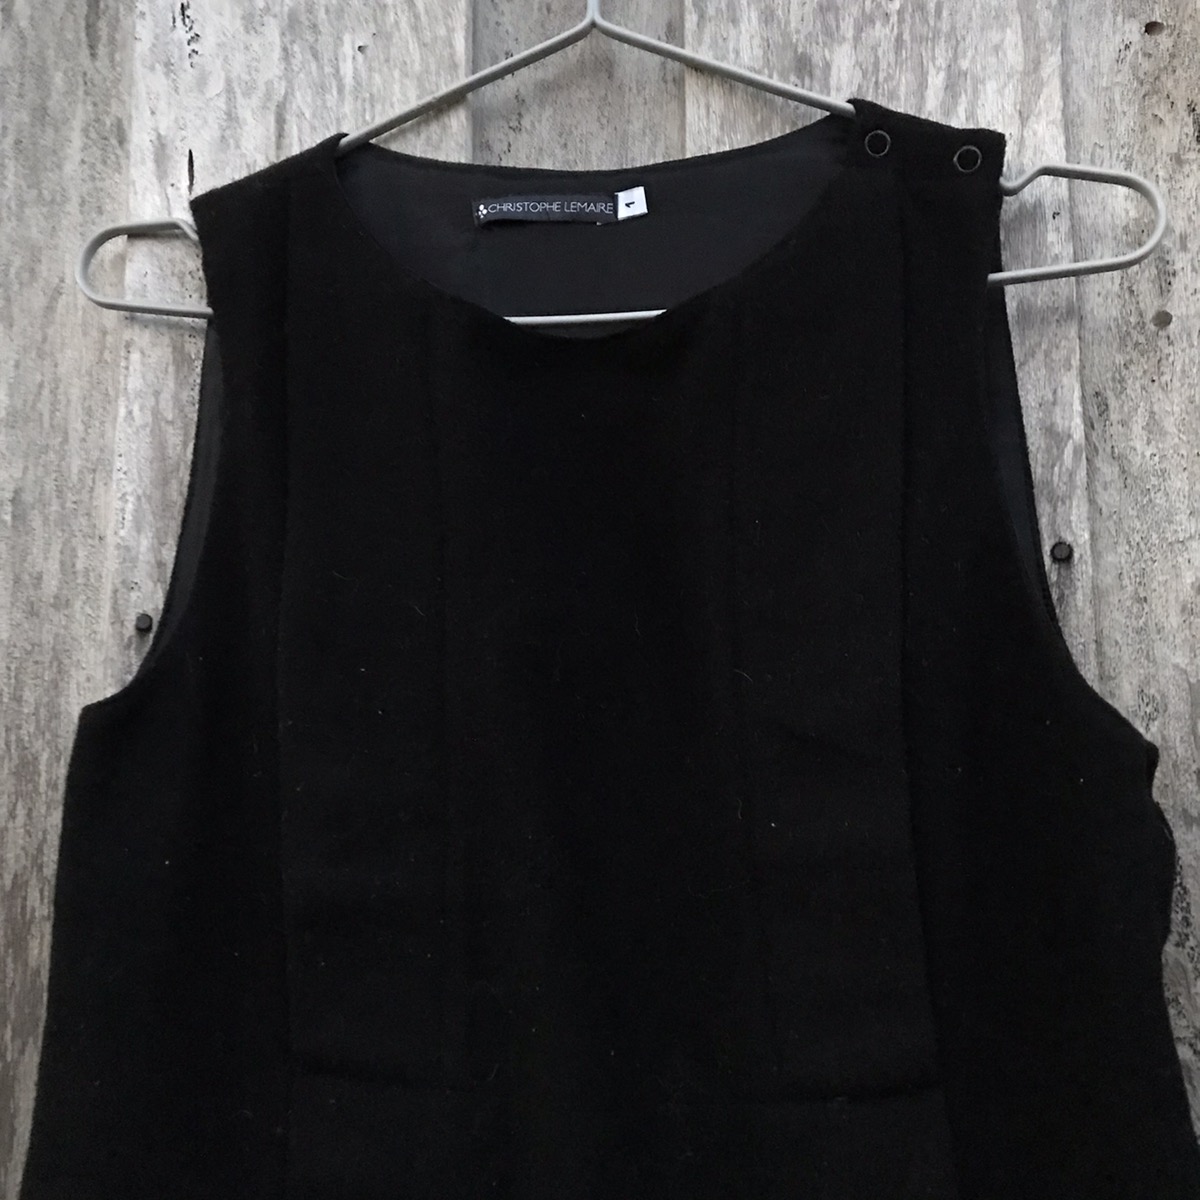 Christophe Lemaire Laine Wool Sleeveless Top - 2